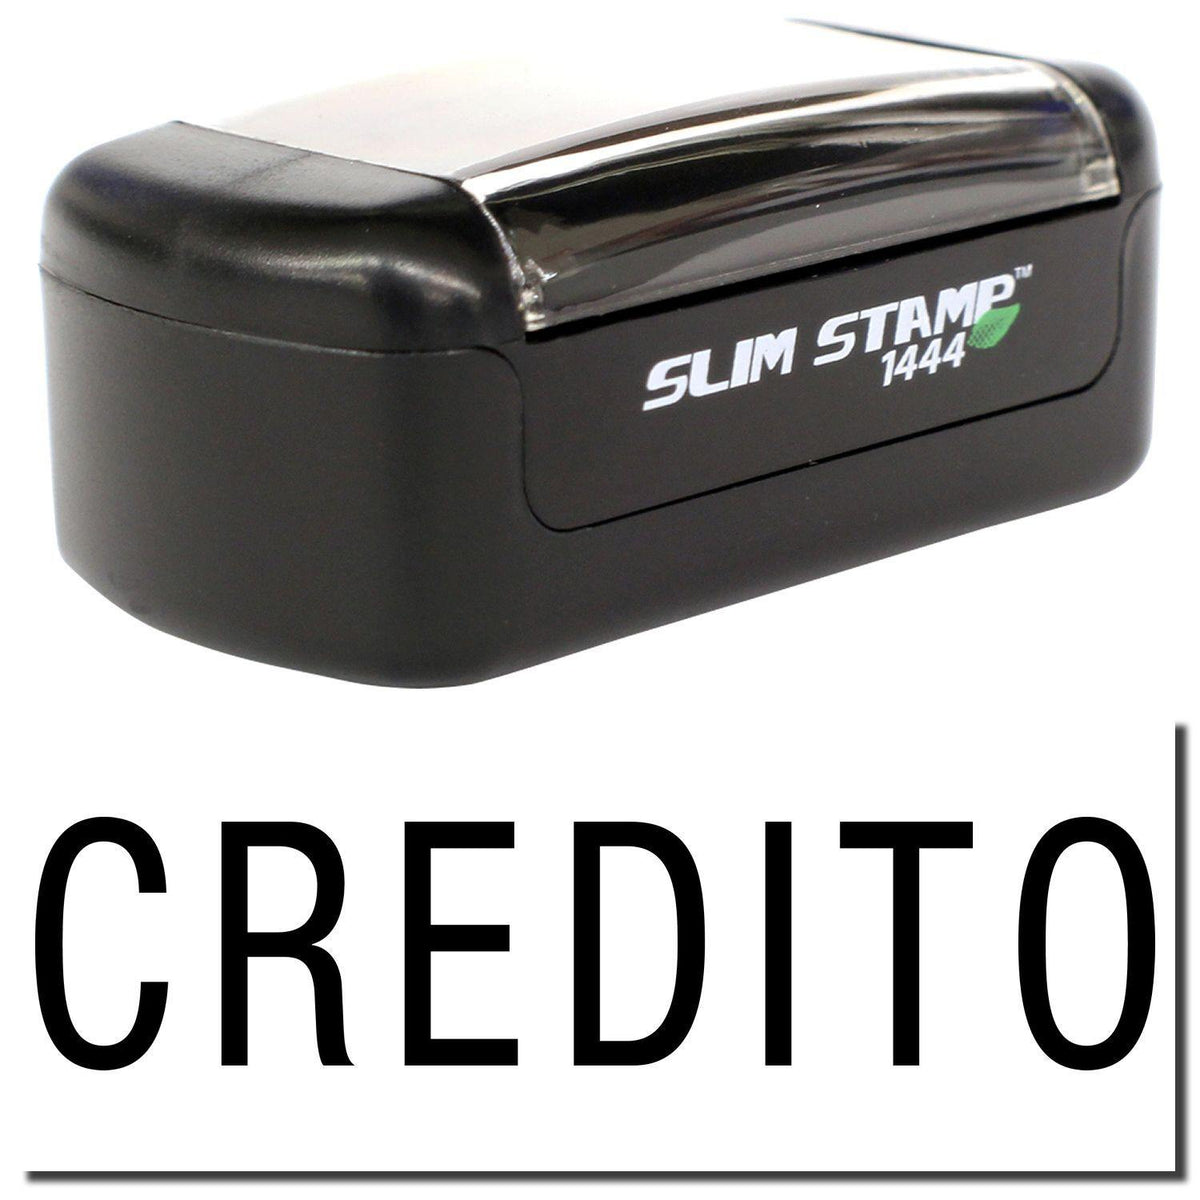 A stock office pre-inked stamp with a stamped image showing how the text &quot;CREDITO&quot; is displayed after stamping.